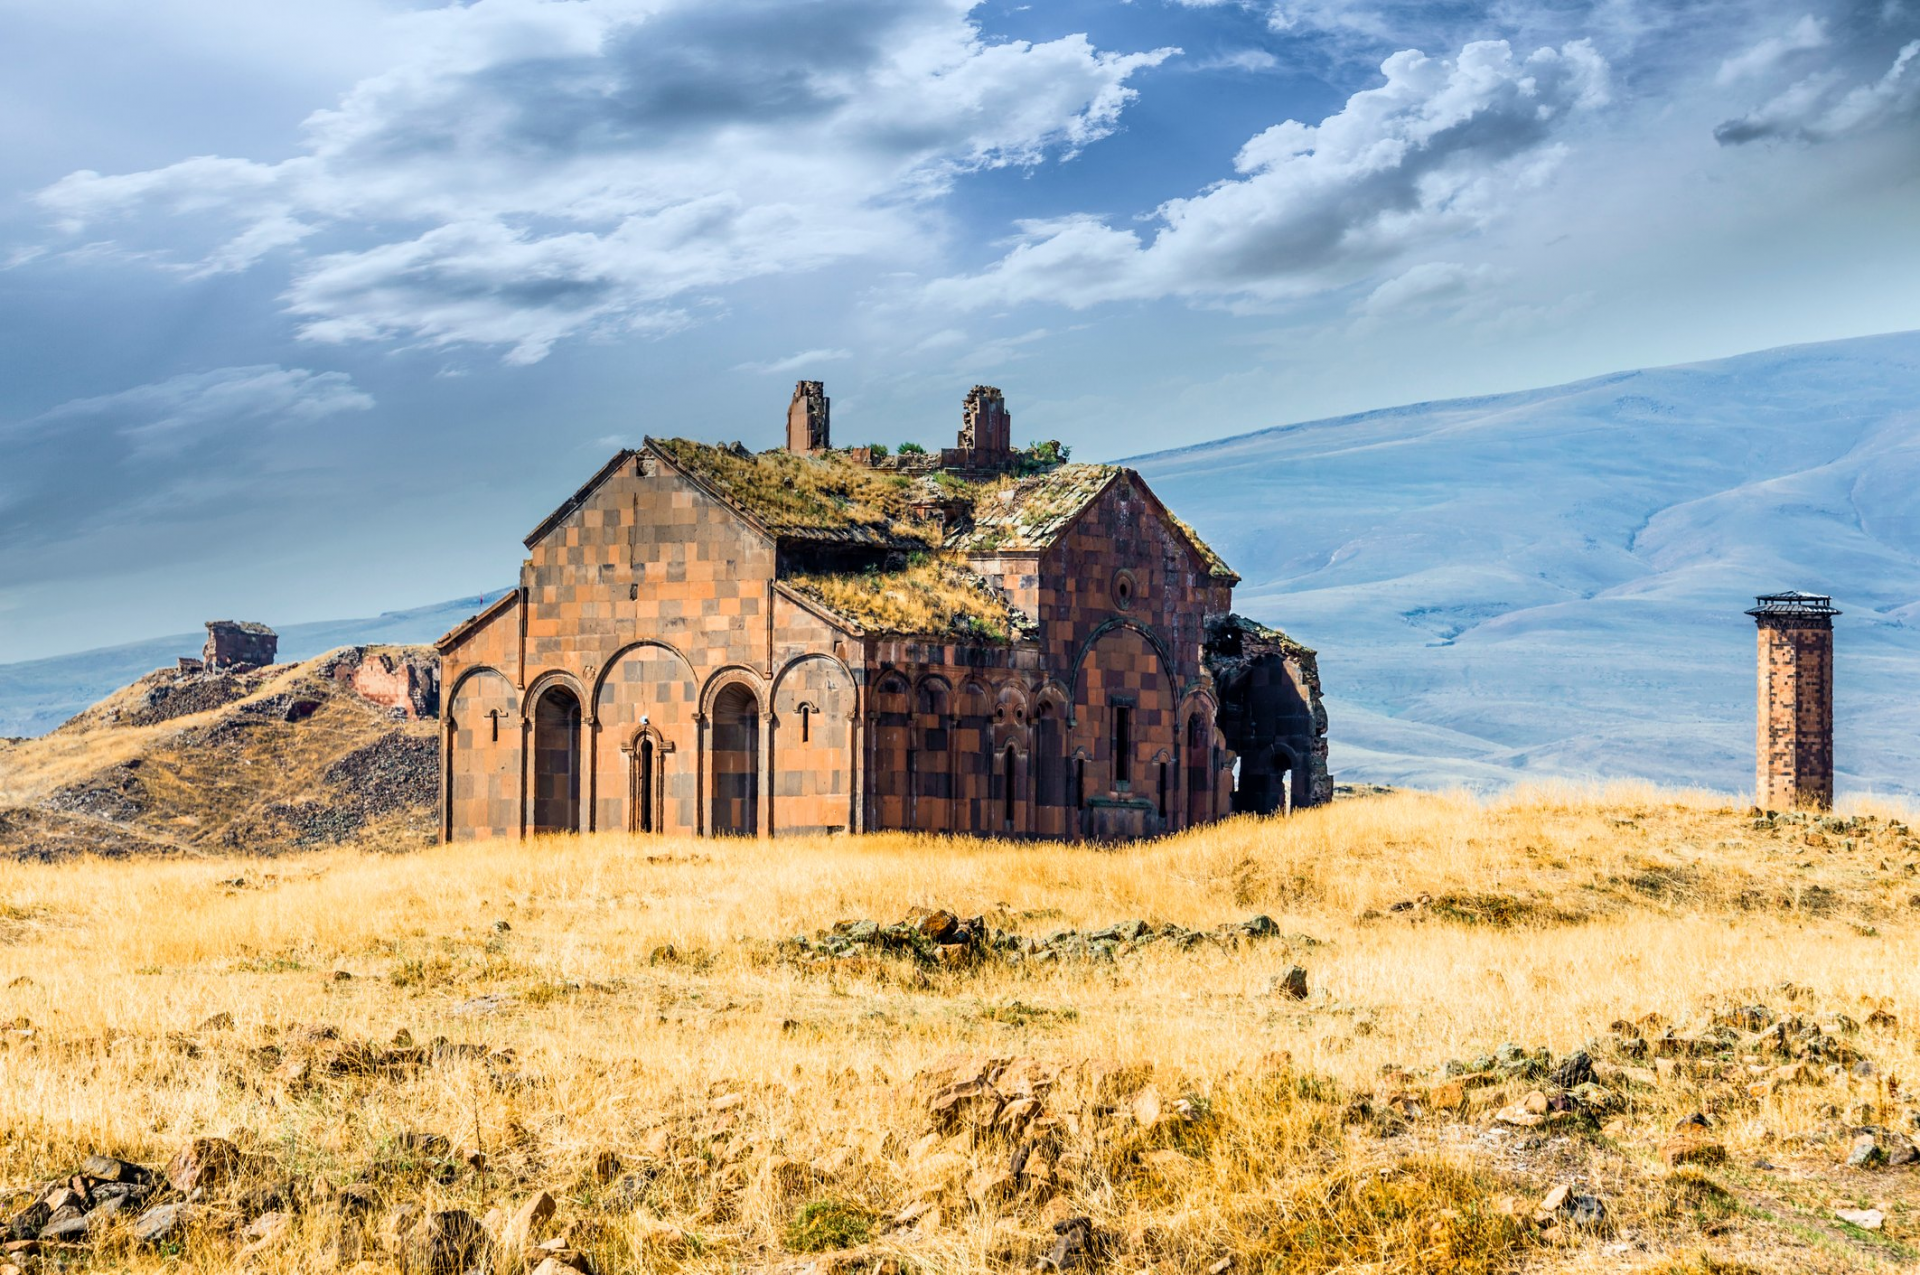 Ani was the capital of the medieval Armenian Kingdom between 961 and 1045 (iStock Photo)